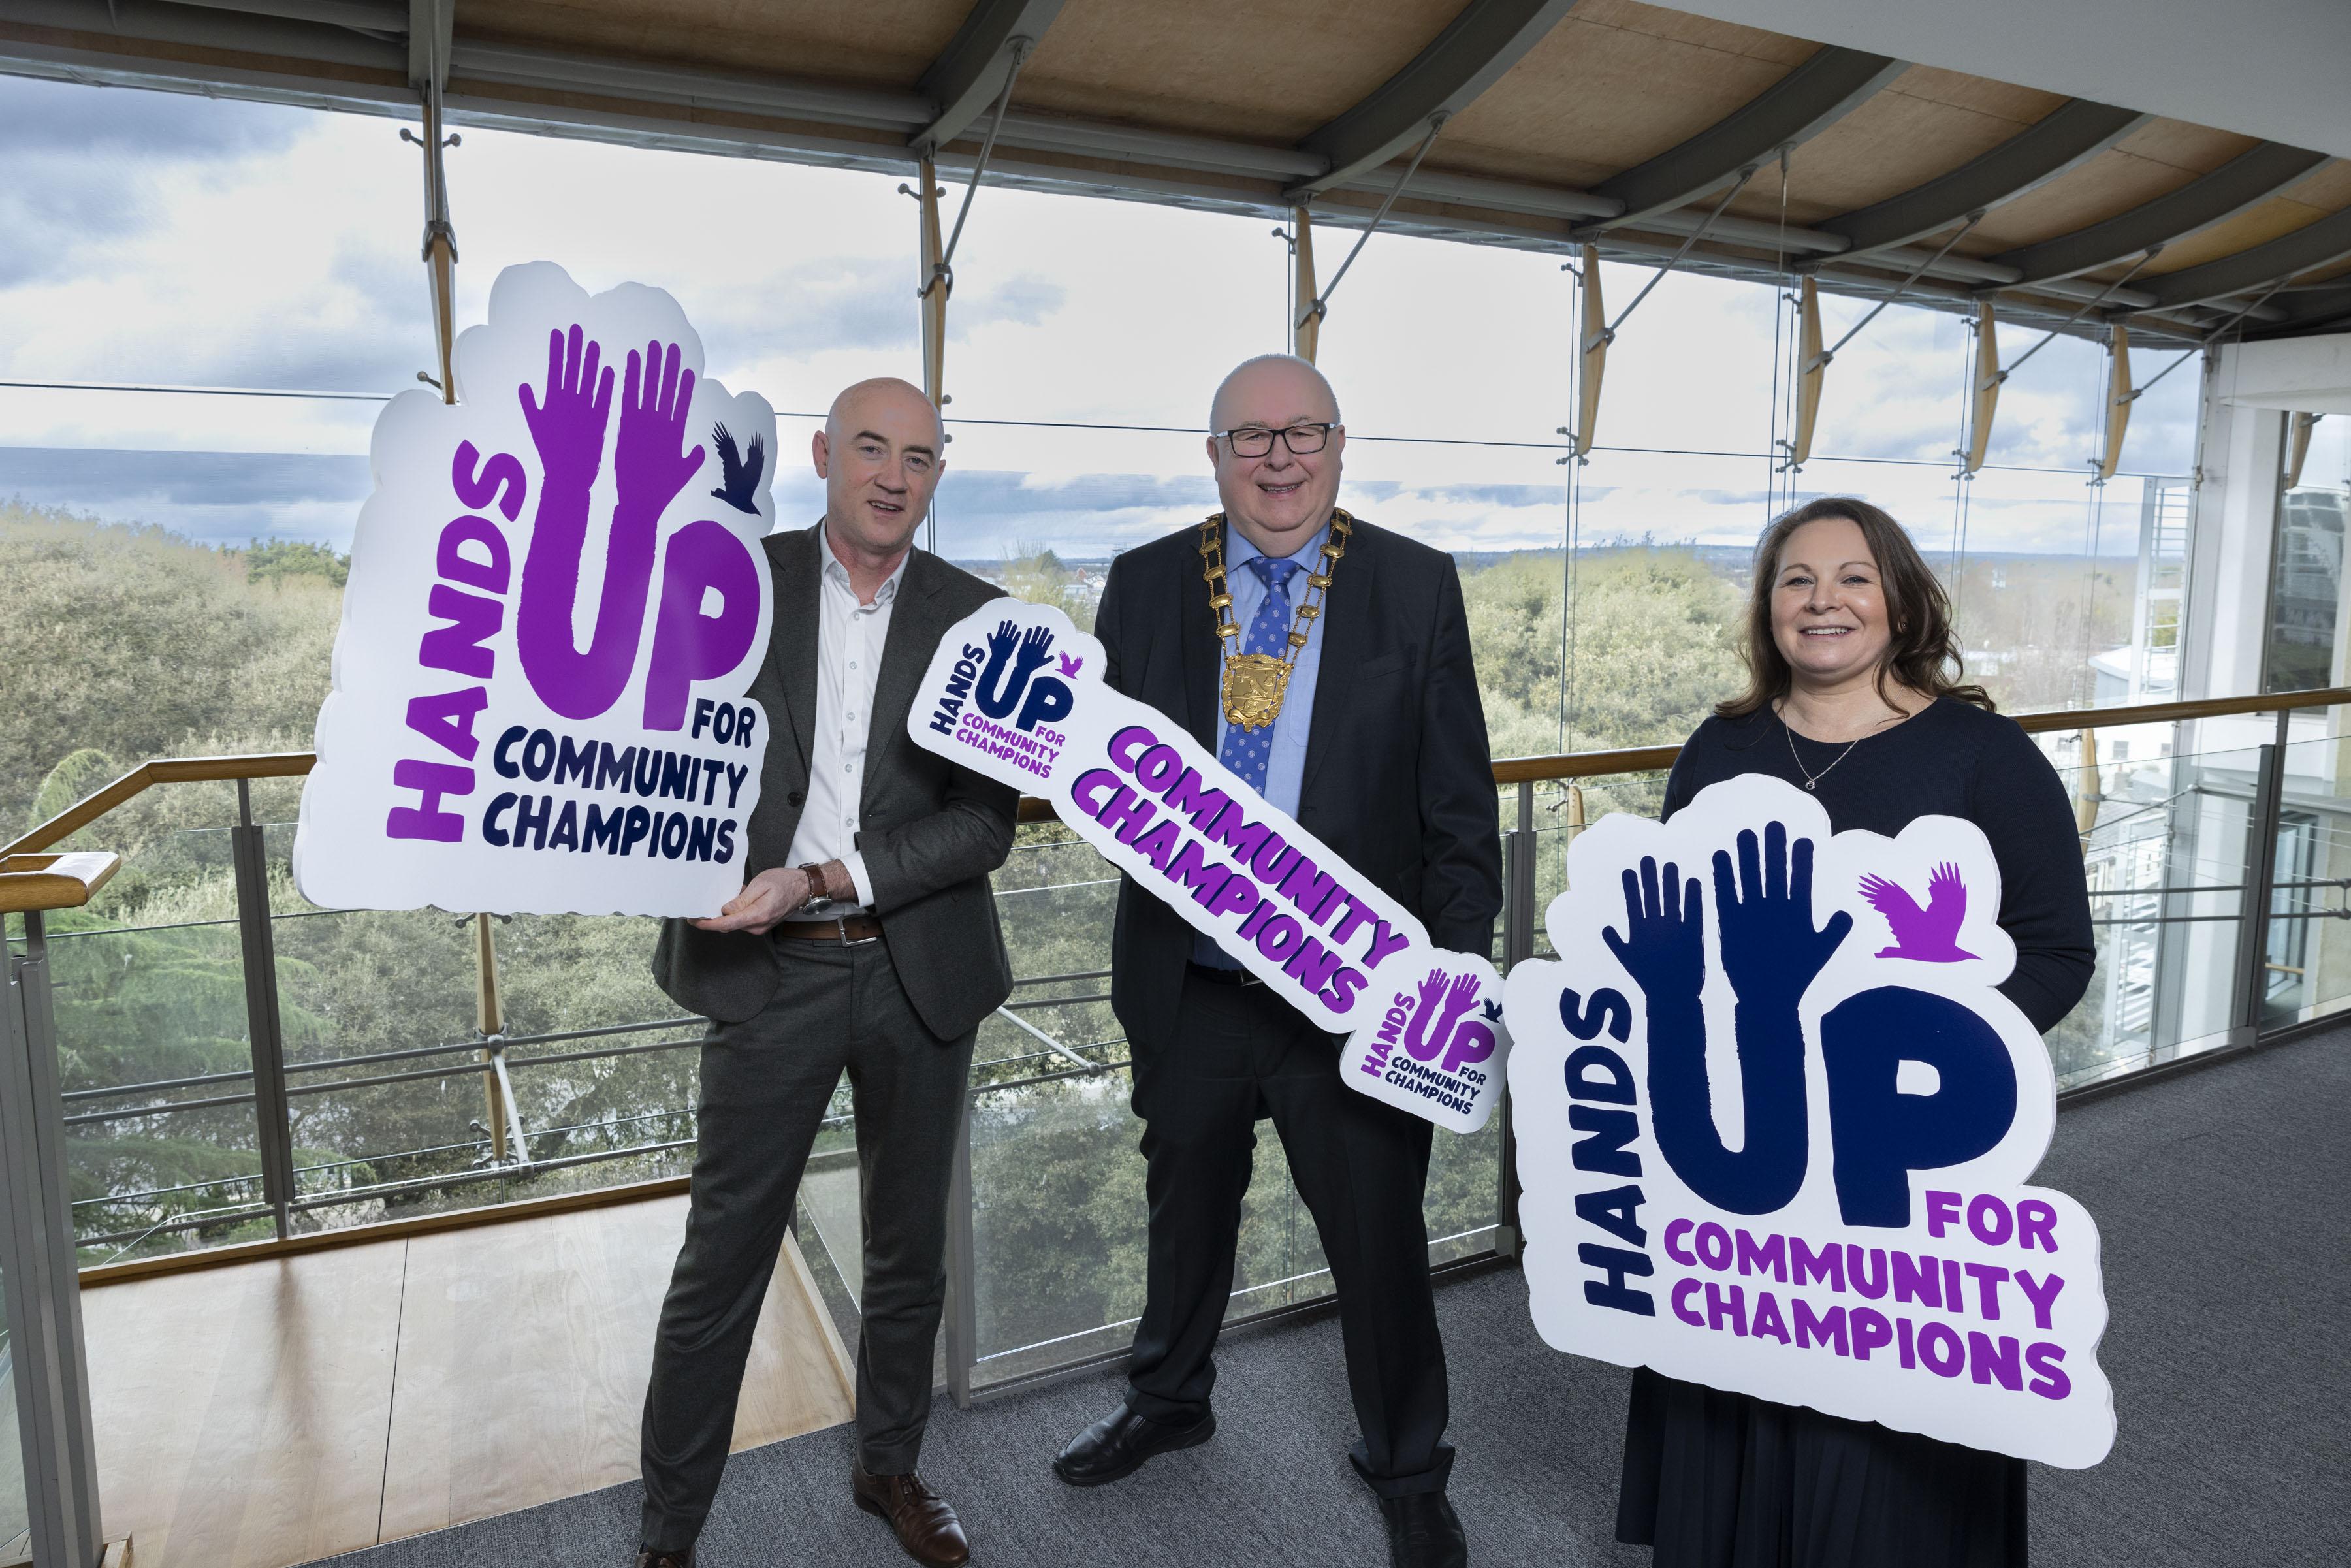 Nominations are now open to find Community Champions in Fingal